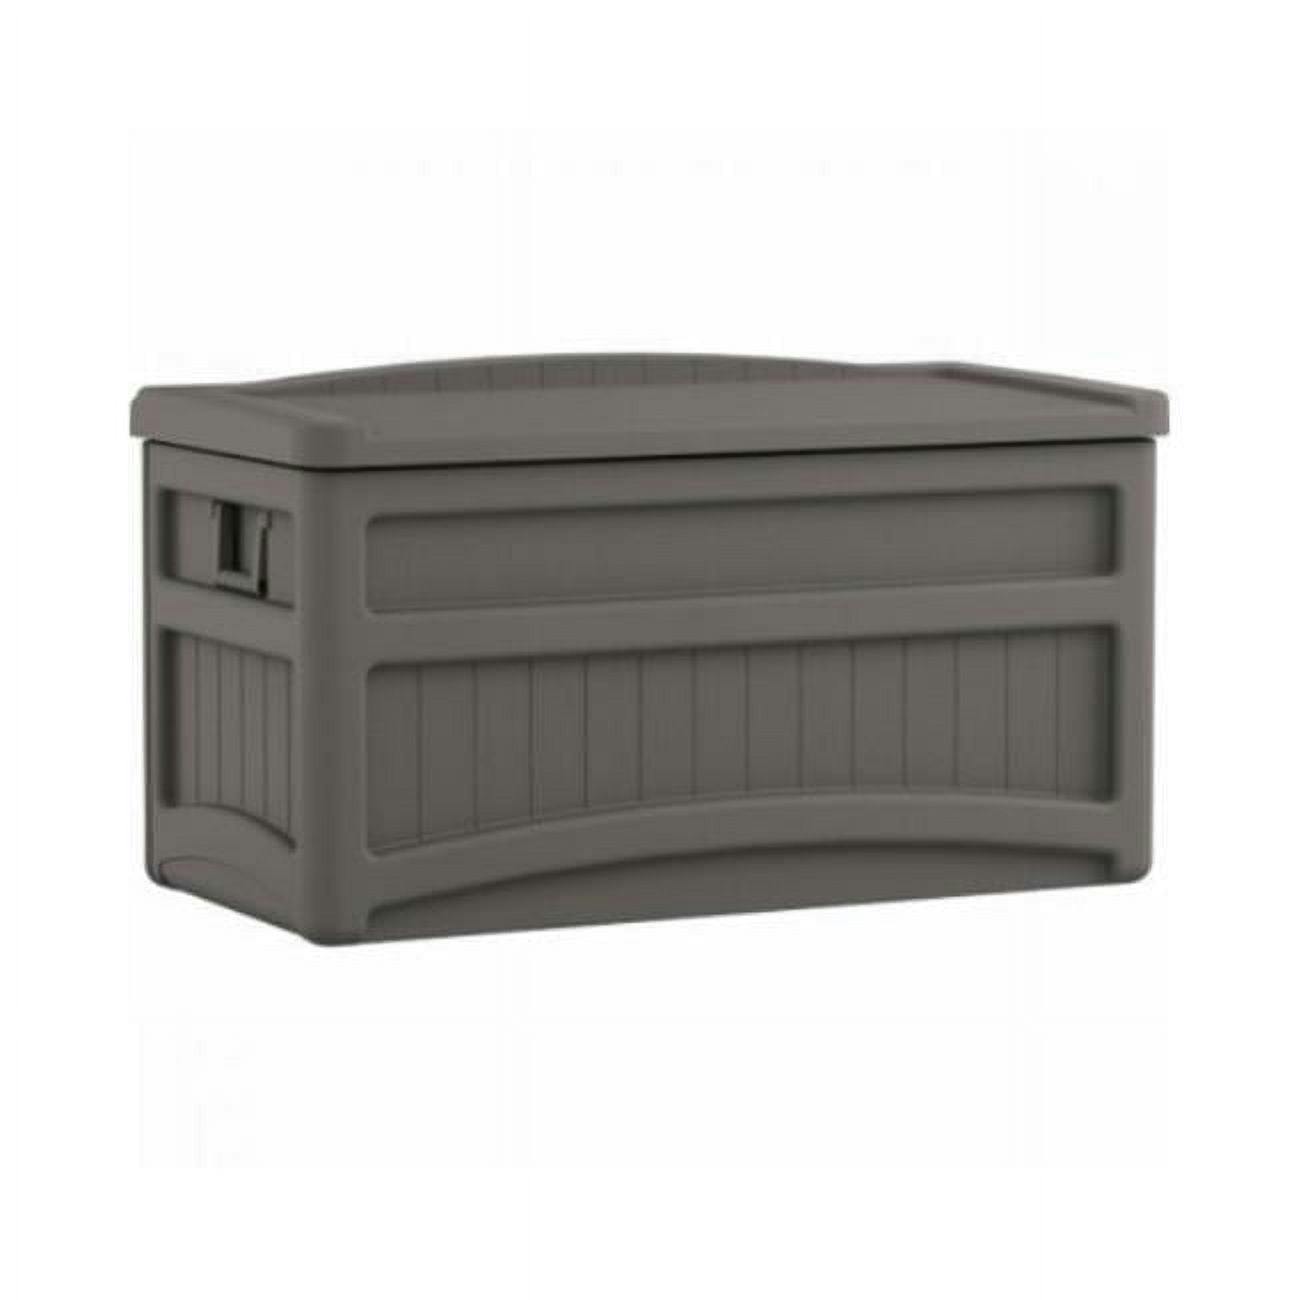 Stoney 73 Gallon Resin Deck Box with Wheels and Seating